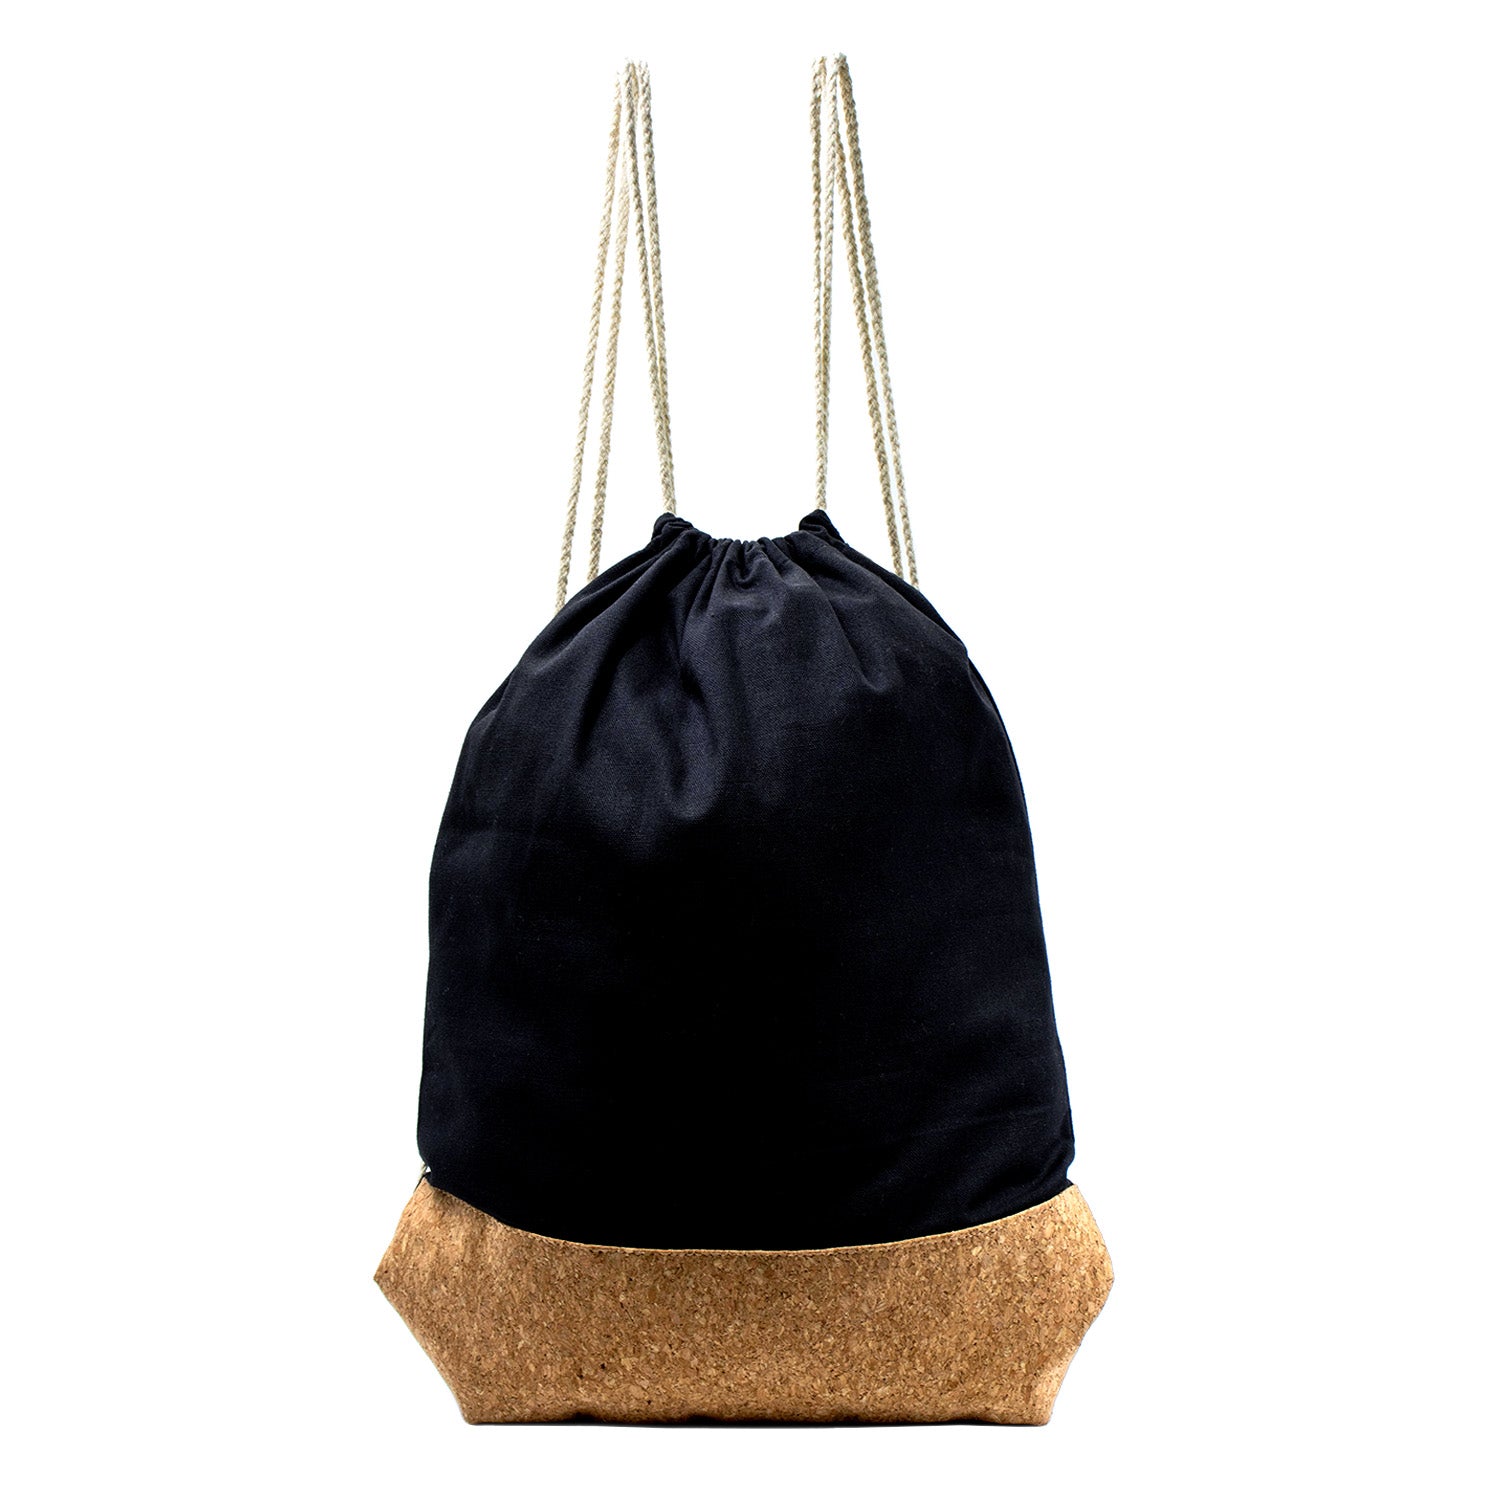 16" Drawstring Wholesale Backpack in Black with Cork - Bulk Case of 100